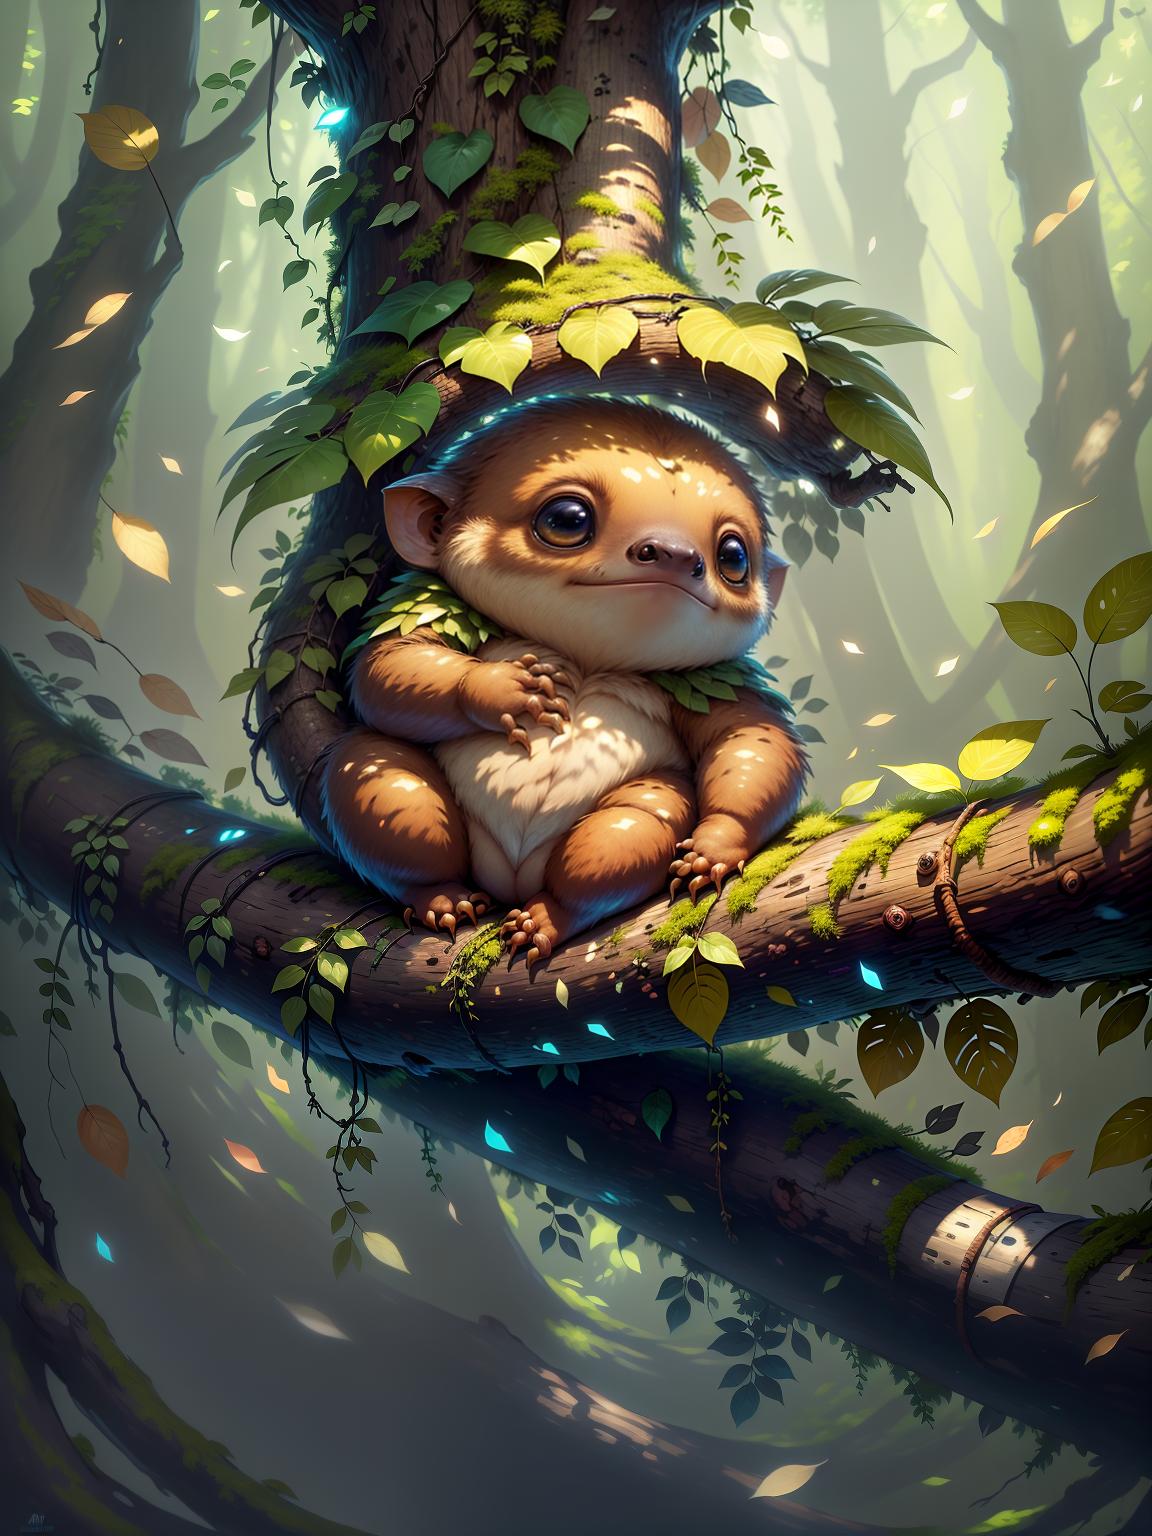  master piece, best quality, ultra detailed, highres, 4k.8k, Sloth., Relaxing, Hanging out with friends, Taking it easy, Chilling out., Content., BREAK Laid back Sloth Lifestyle., Leafy tree canopy., Hanging vines, Sunlight filtering through the leaves, Tree branches, Moss covered logs., BREAK Tranquil and serene., Soft, warm lighting, Calming and peaceful ambiance., magic particles,Cu73Cre4ture,fun00d